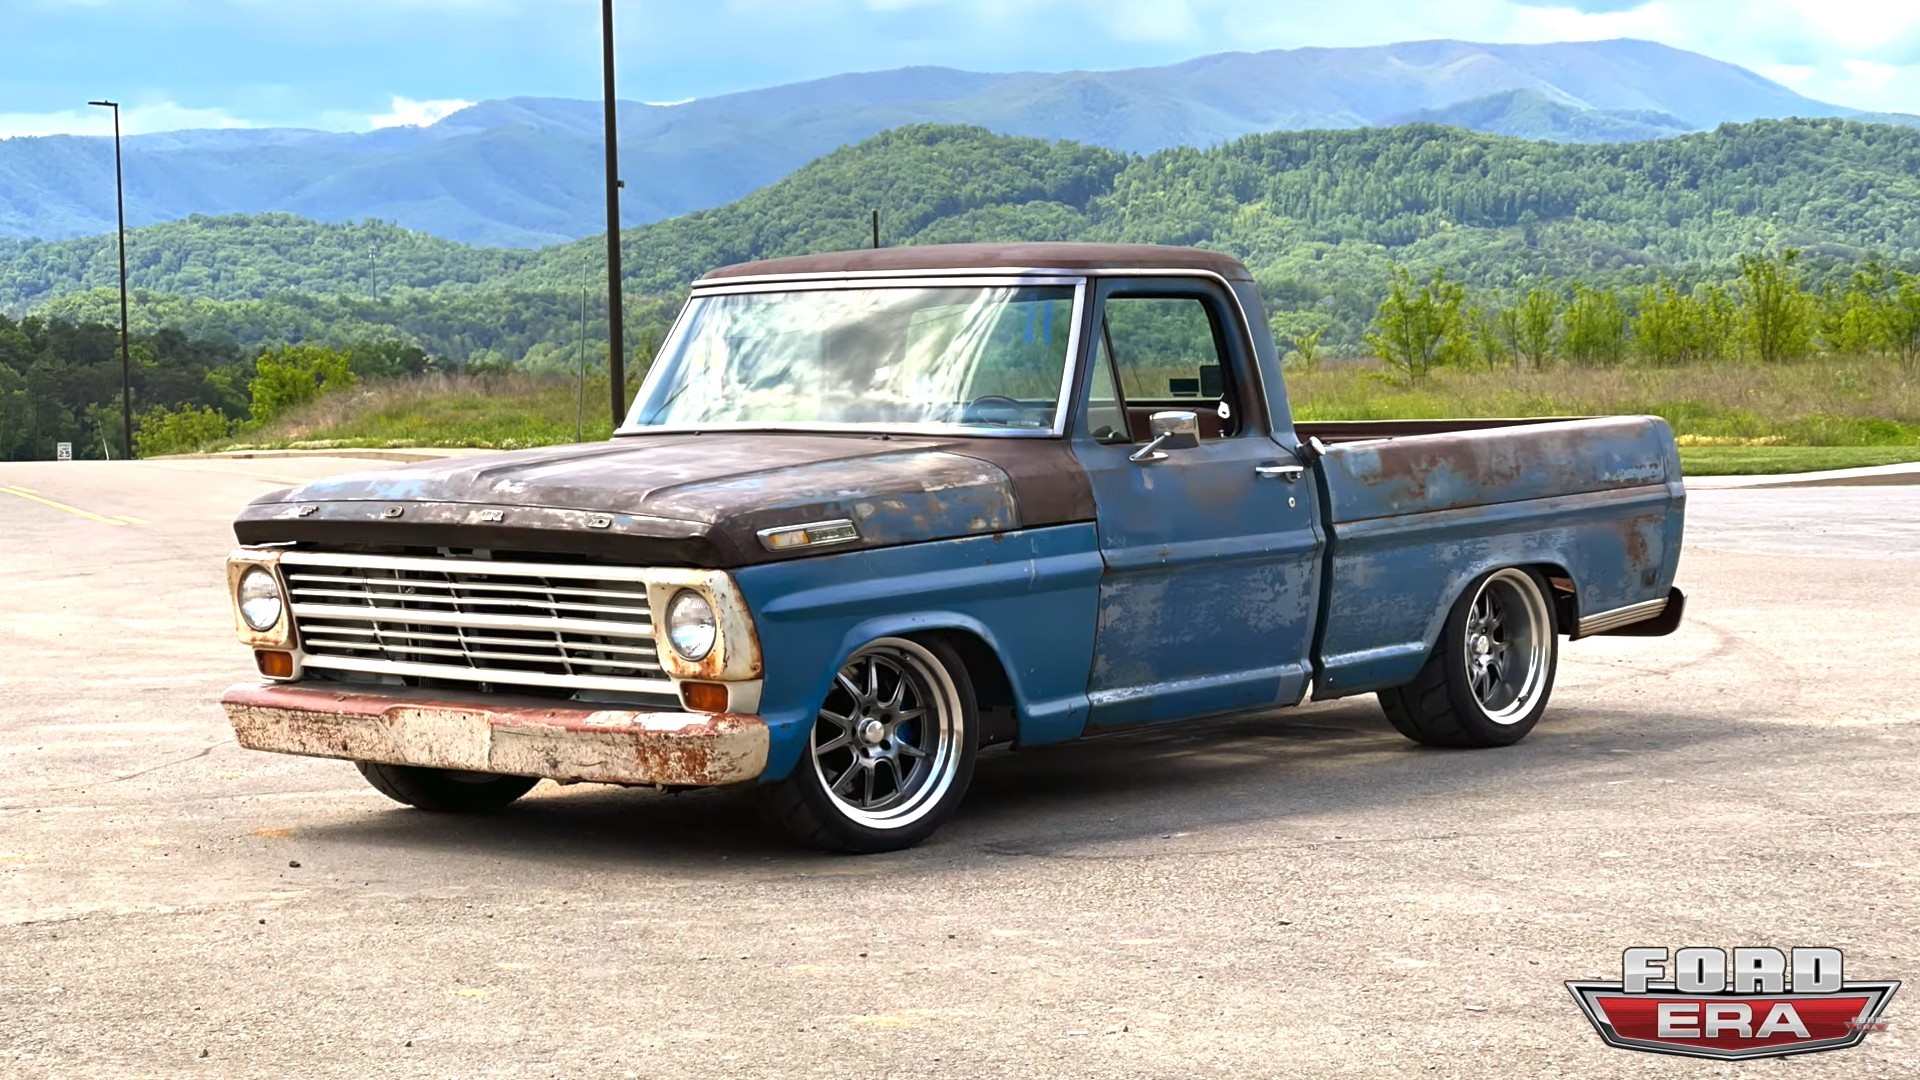 1969 Ford F100 | vlr.eng.br